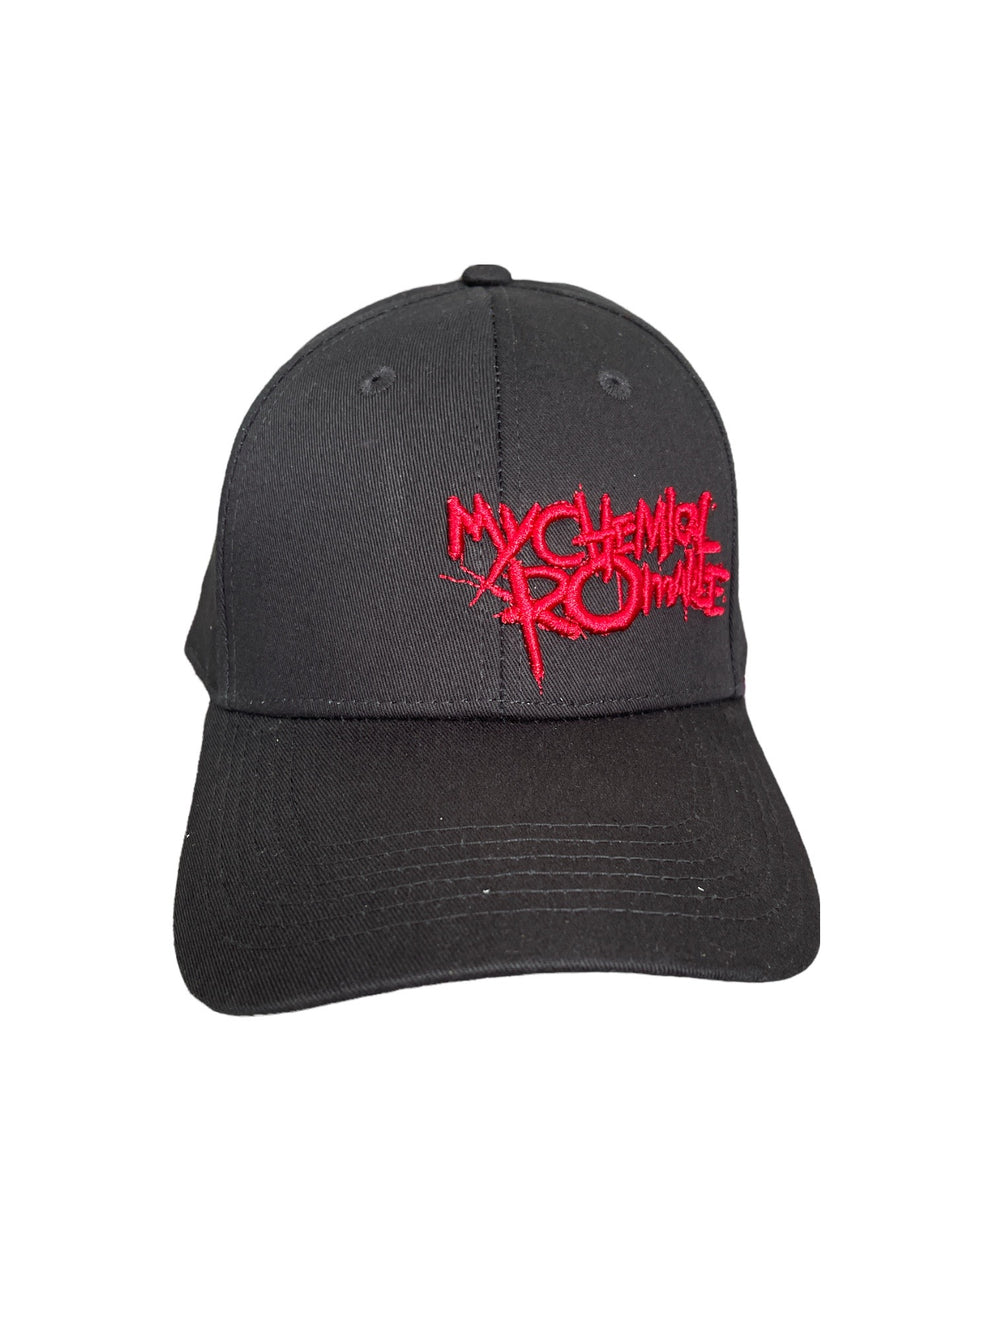 My Chemical Romance  Logo Official Chunky Embroidered Peak Cap Adjustable